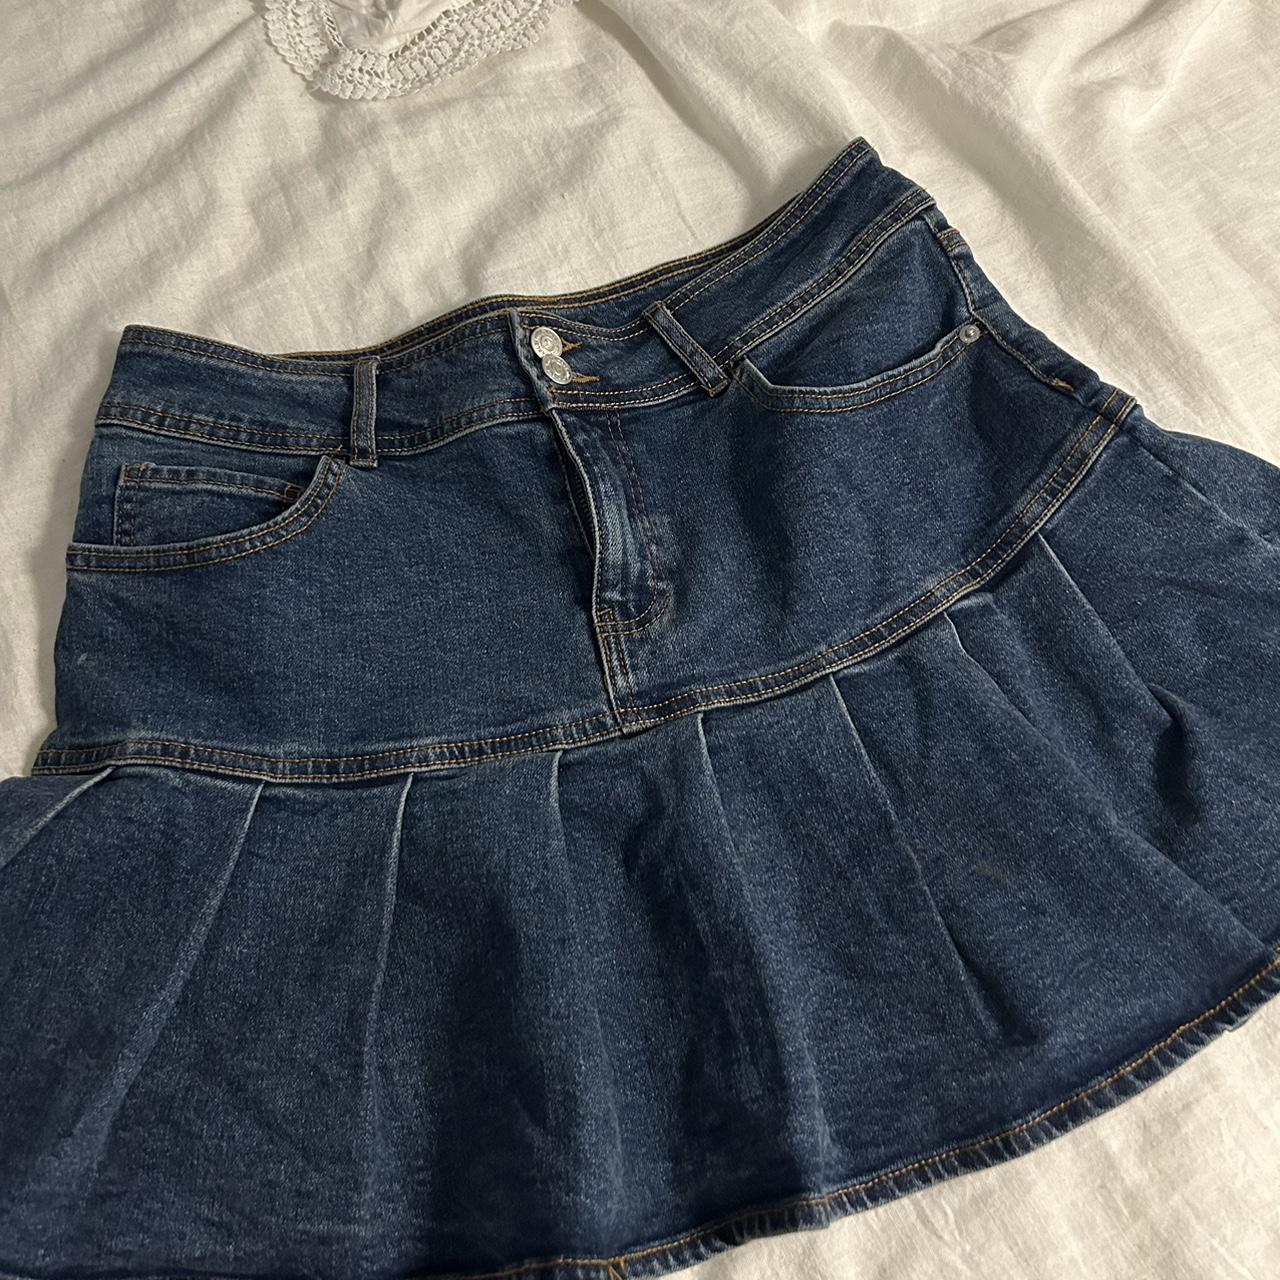 Target Y2K Skirt!! only worn a couple of times,... - Depop